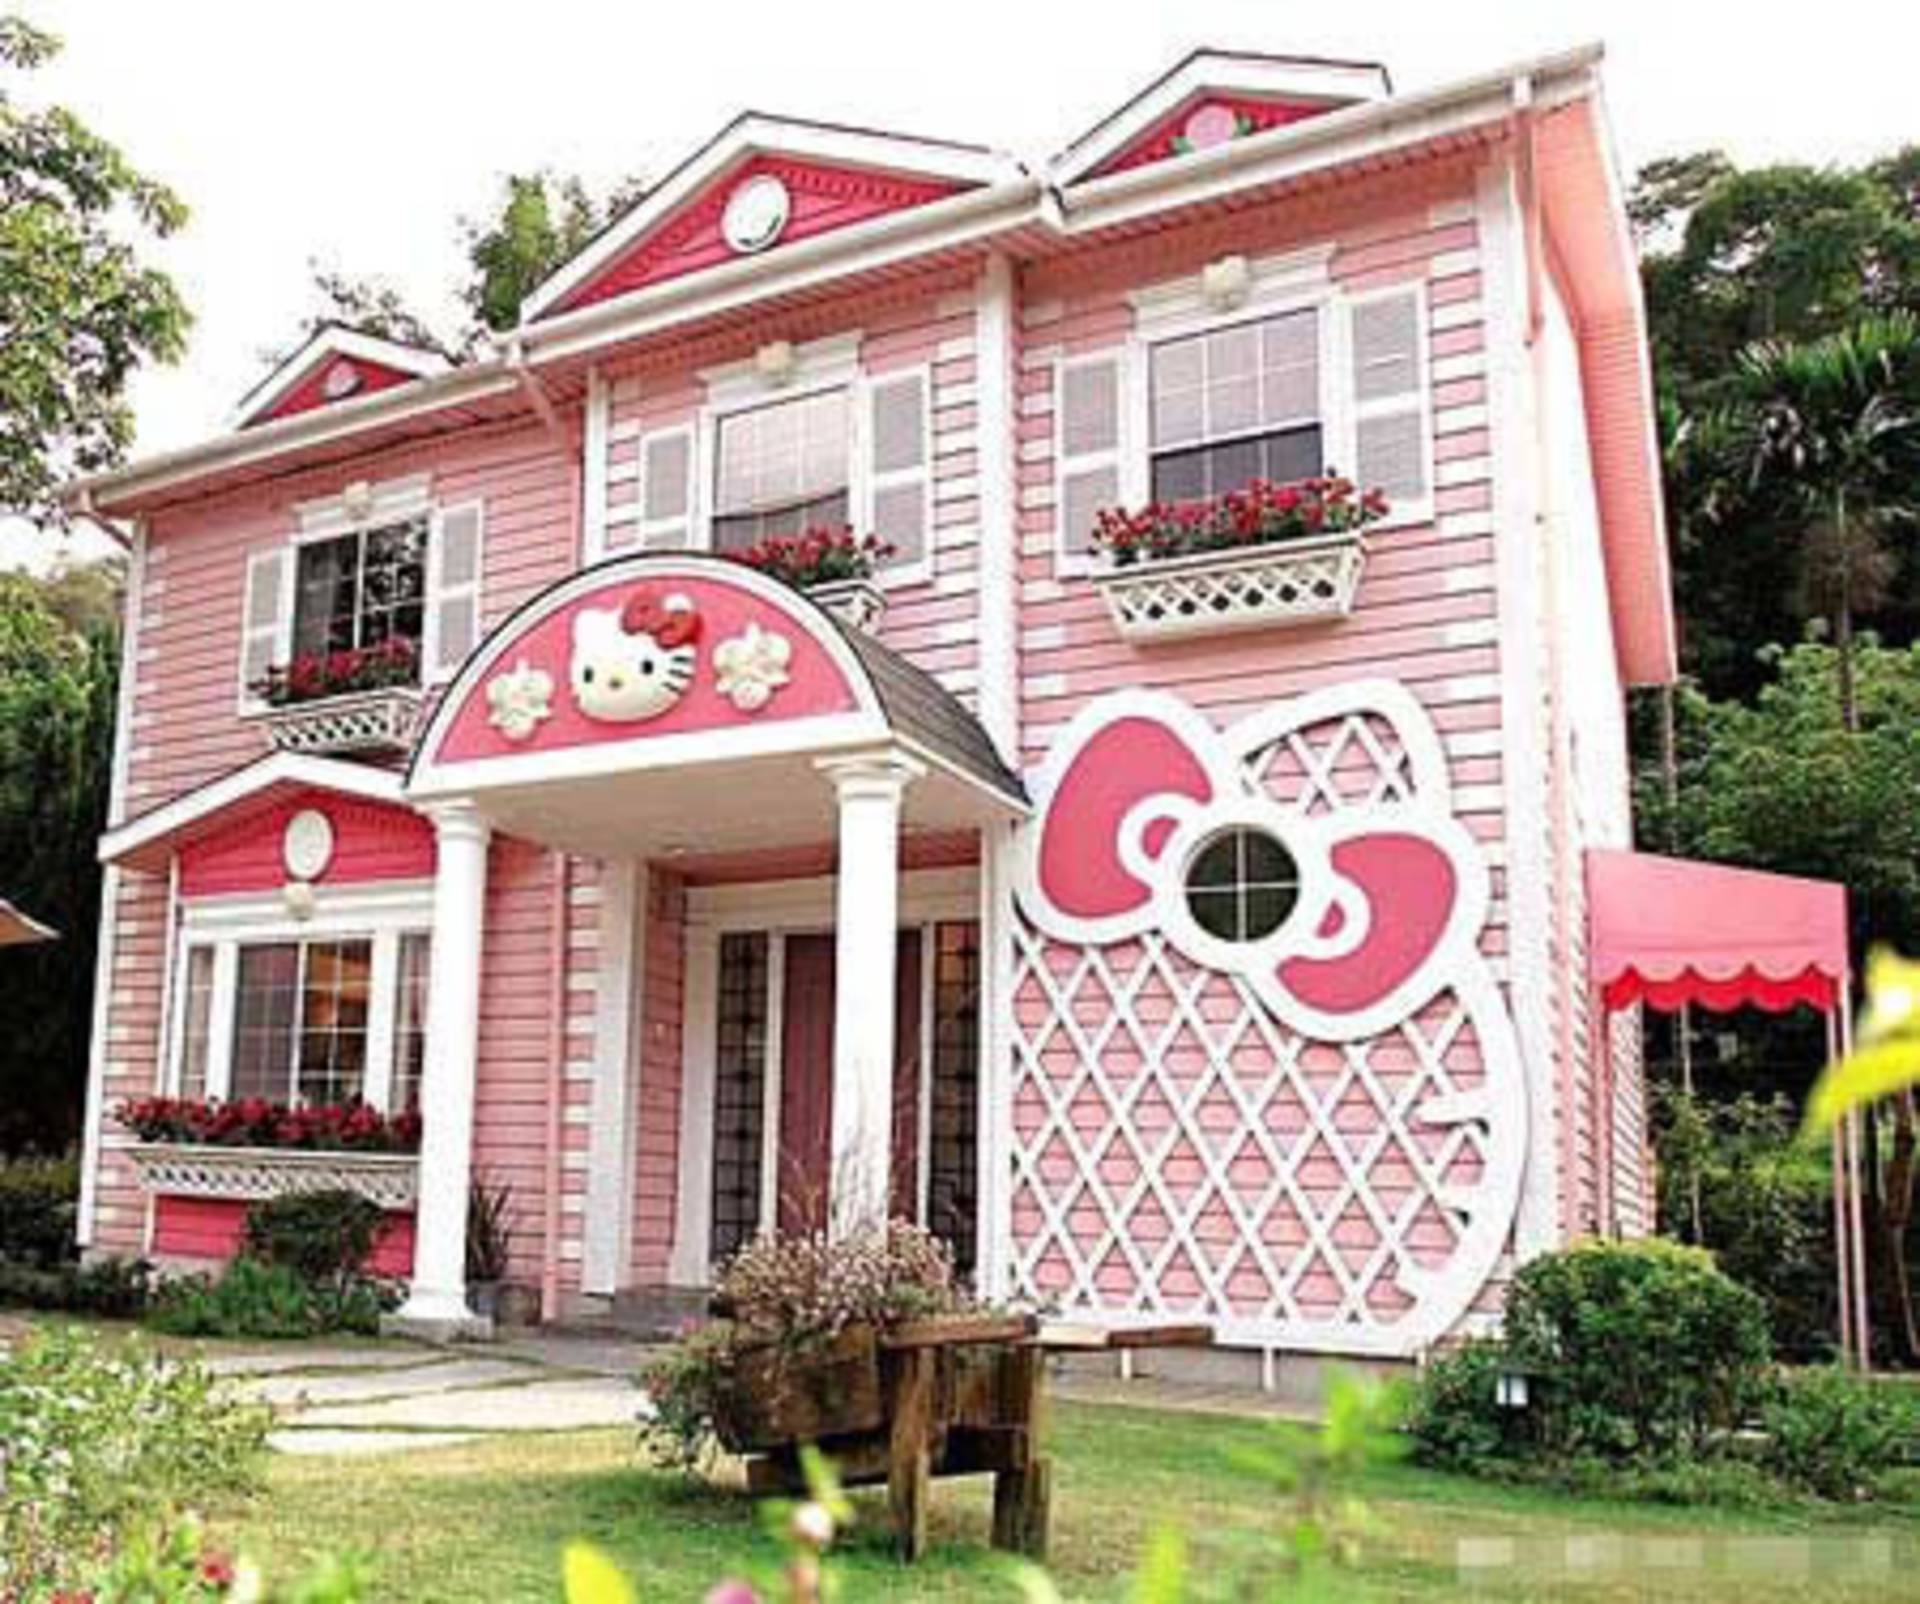 The House Of A Dream Coloured Pink Hello Kitty Theme Home Reviews